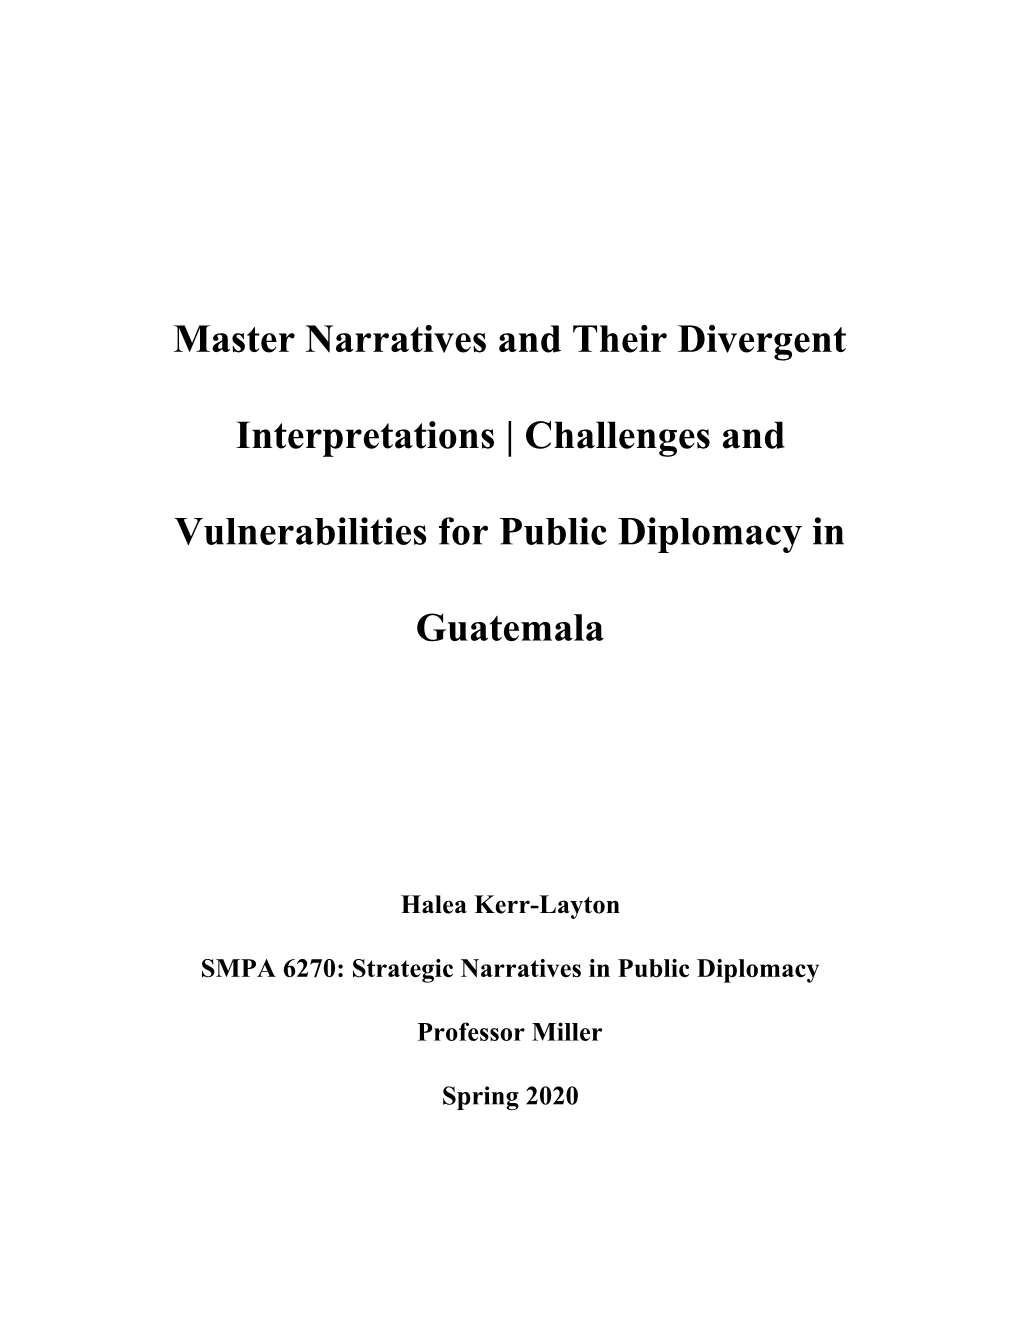 Challenges and Vulnerabilities for Public Diplomacy in Guatemala